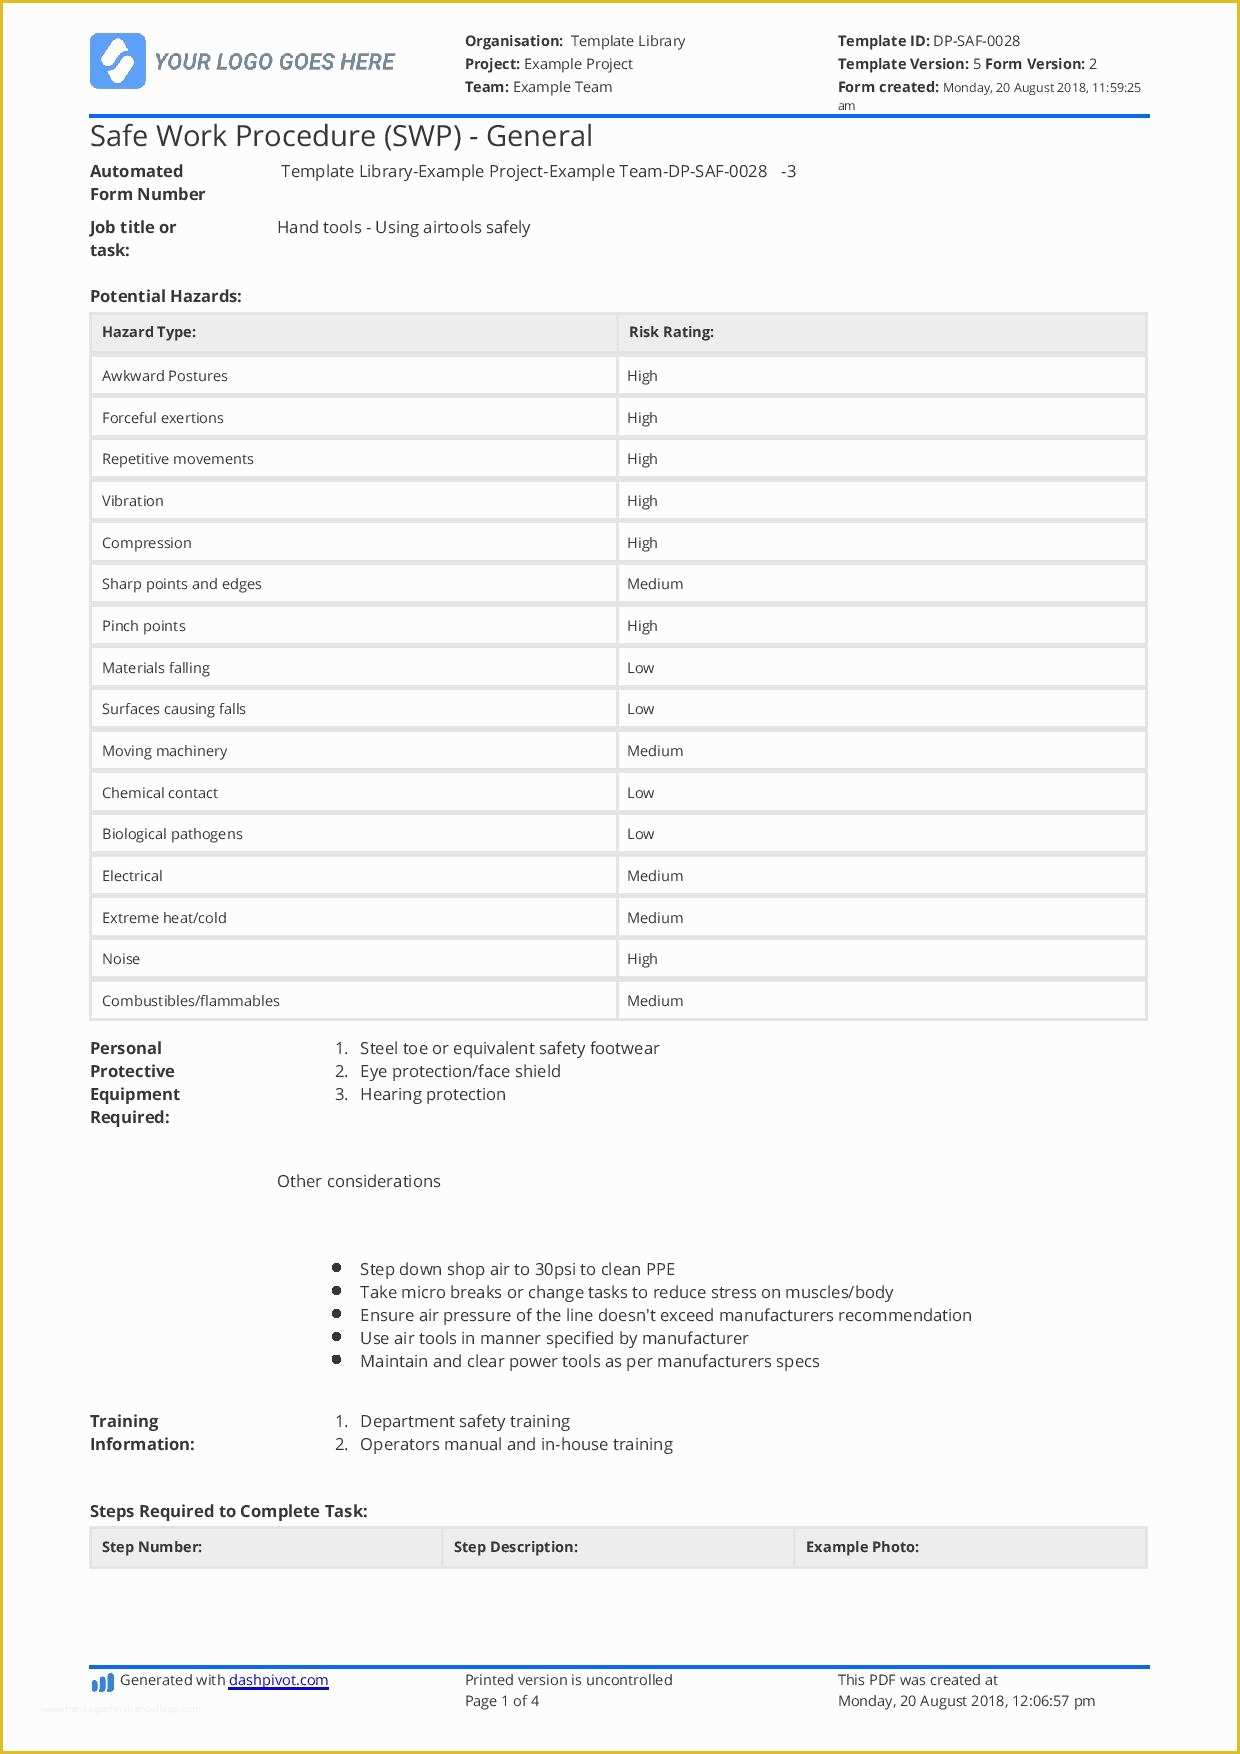 Free Safety Program Template Of Safe Work Procedure Template Swp Template Use It Free Here